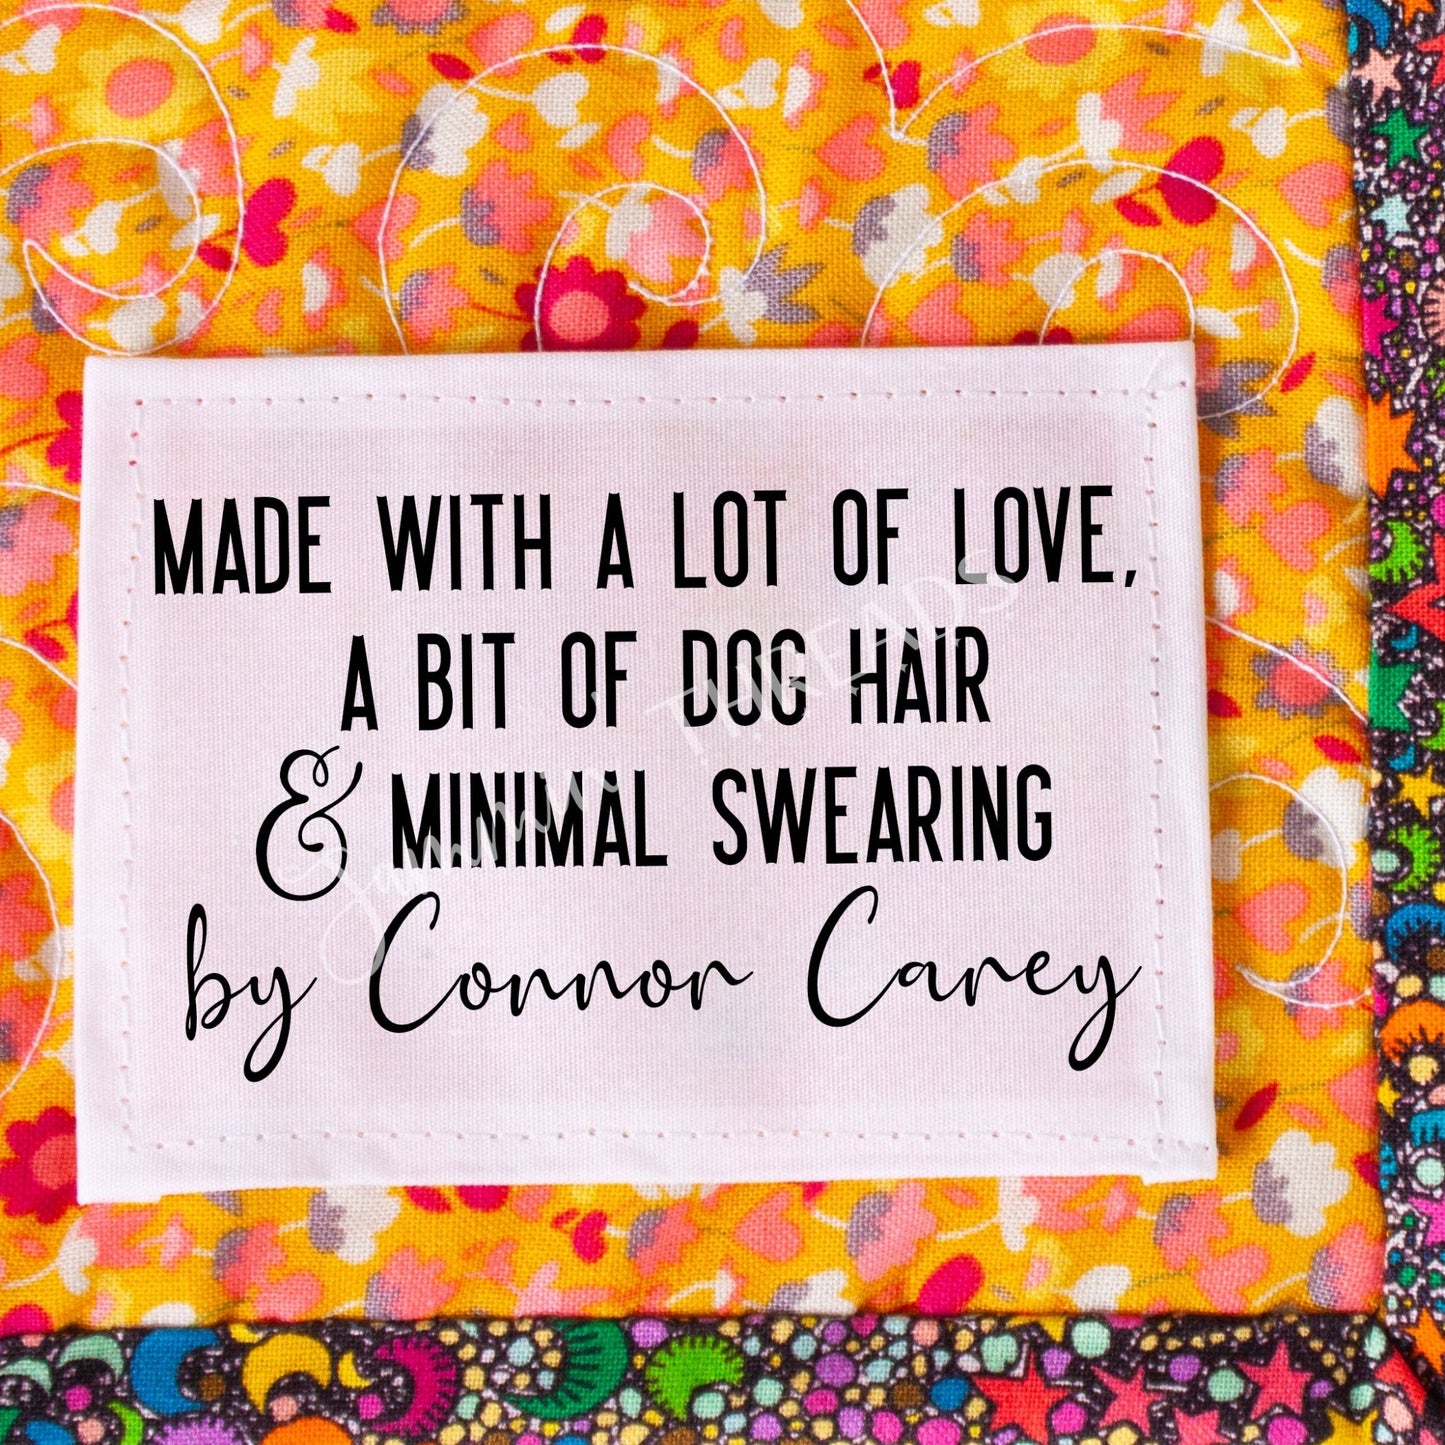 A Bit of Dog Hair and Minimal Swearing - Funny Personalized Quilt Labels - Jammin Threads